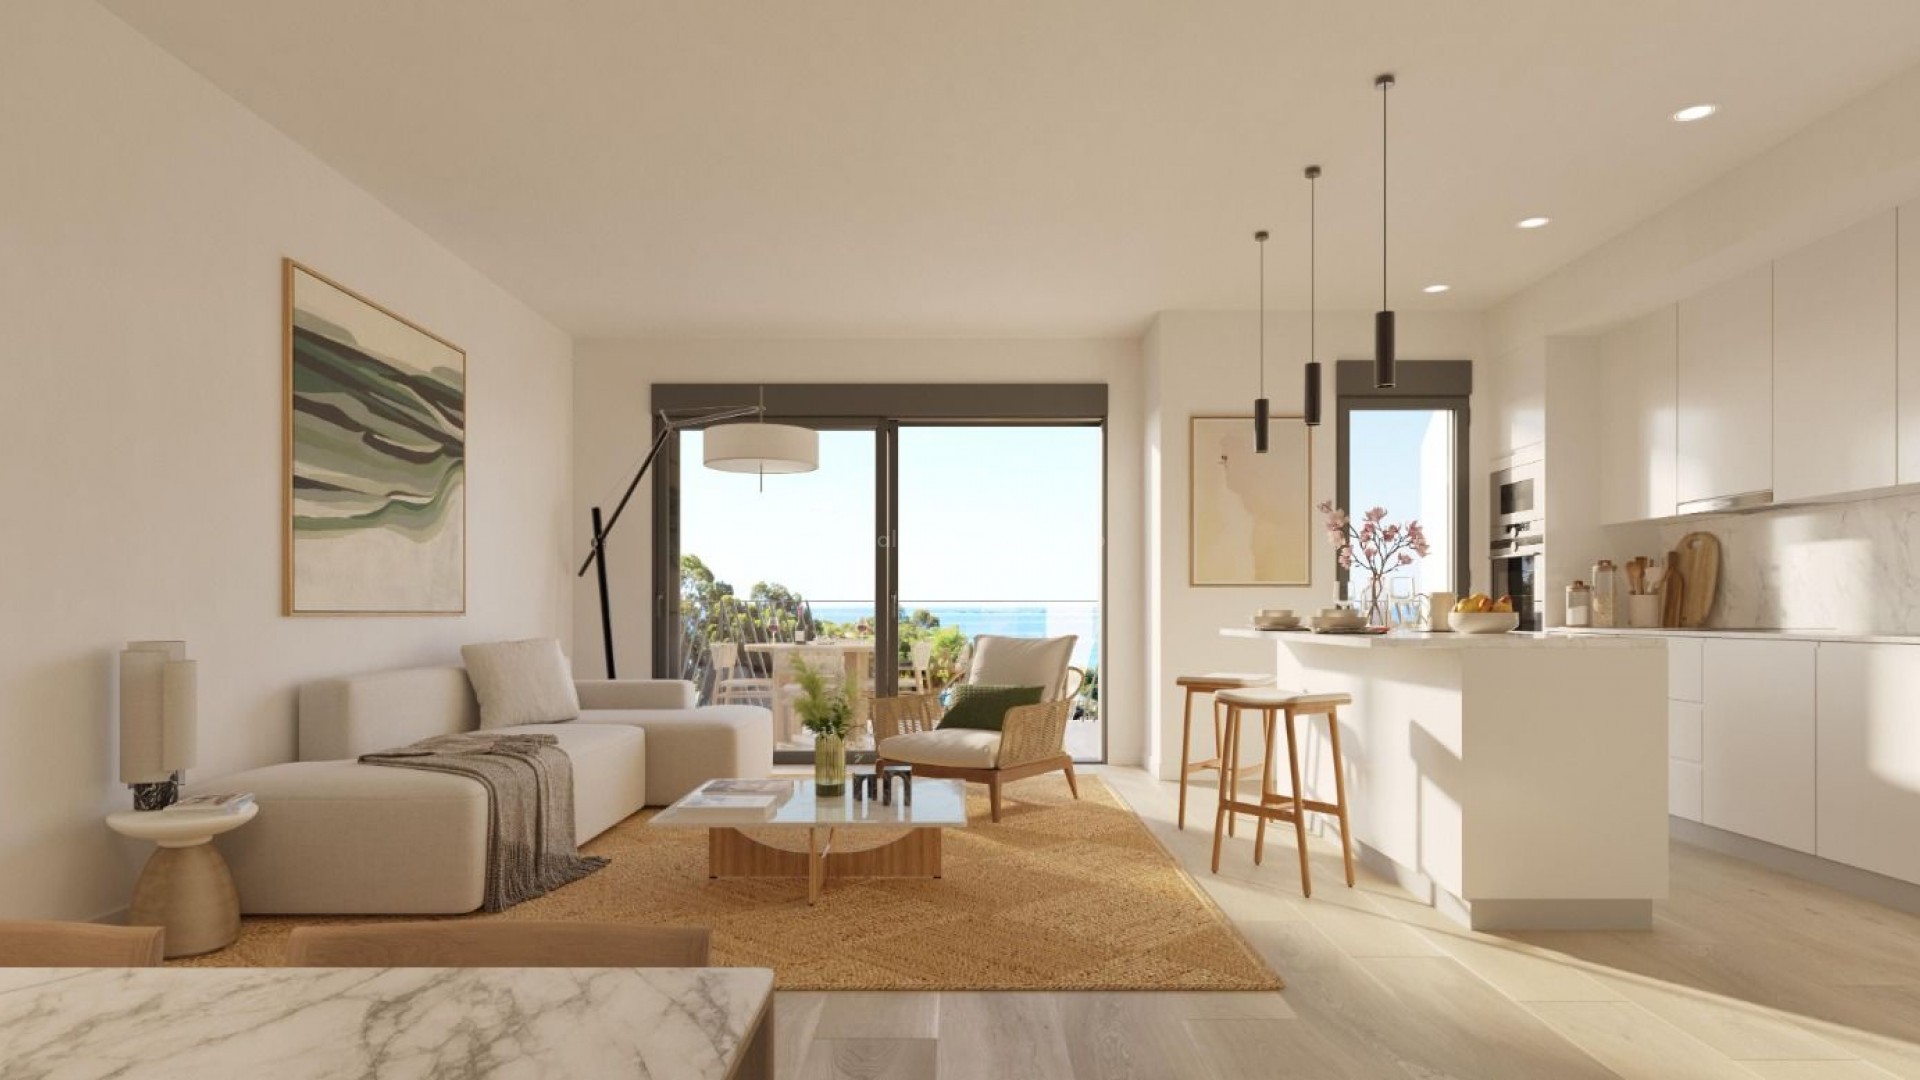 Luxury apartments and penthouses right by the sea in Villajoyosa, 2 bedrooms, 2 bathrooms, Only 50 meters from the sea, with spacious terraces with sea views